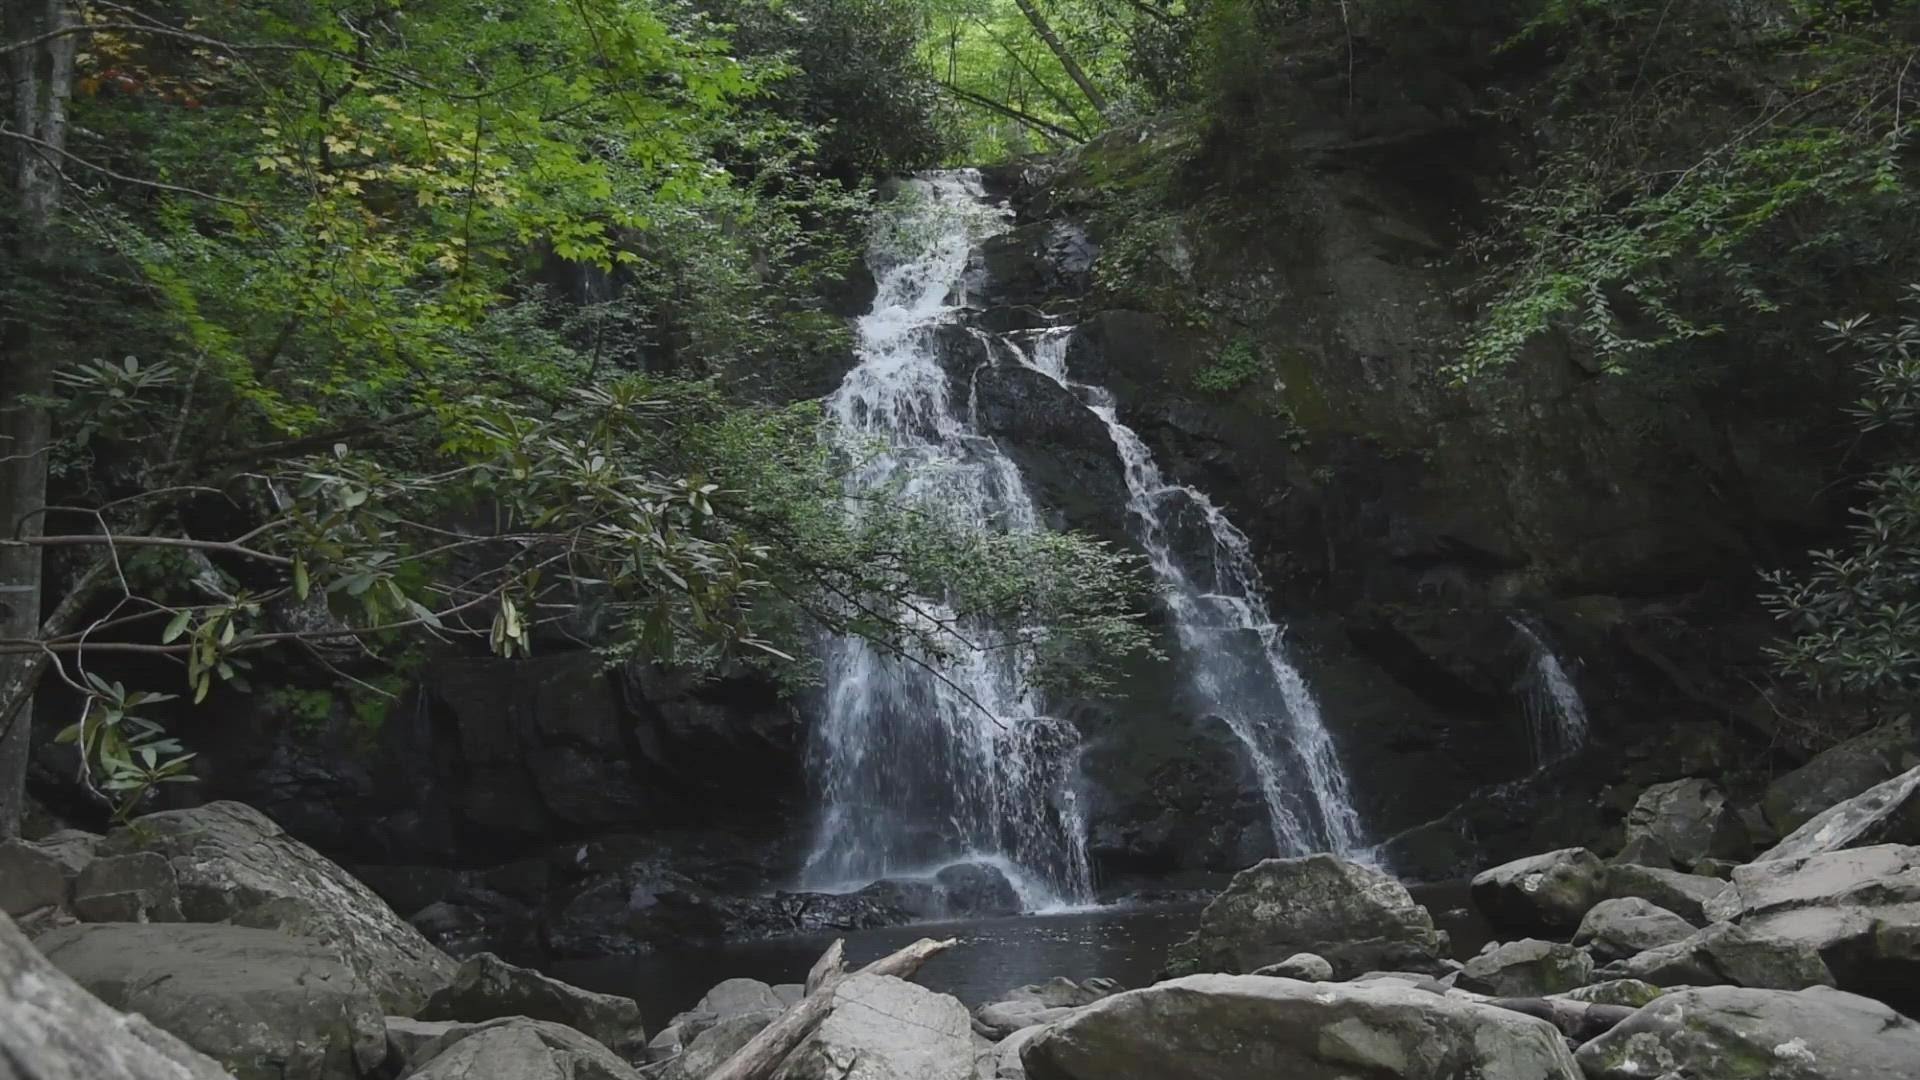 Sights and sounds from Spruce Flats Falls in the Great Smoky Mountains National Park.